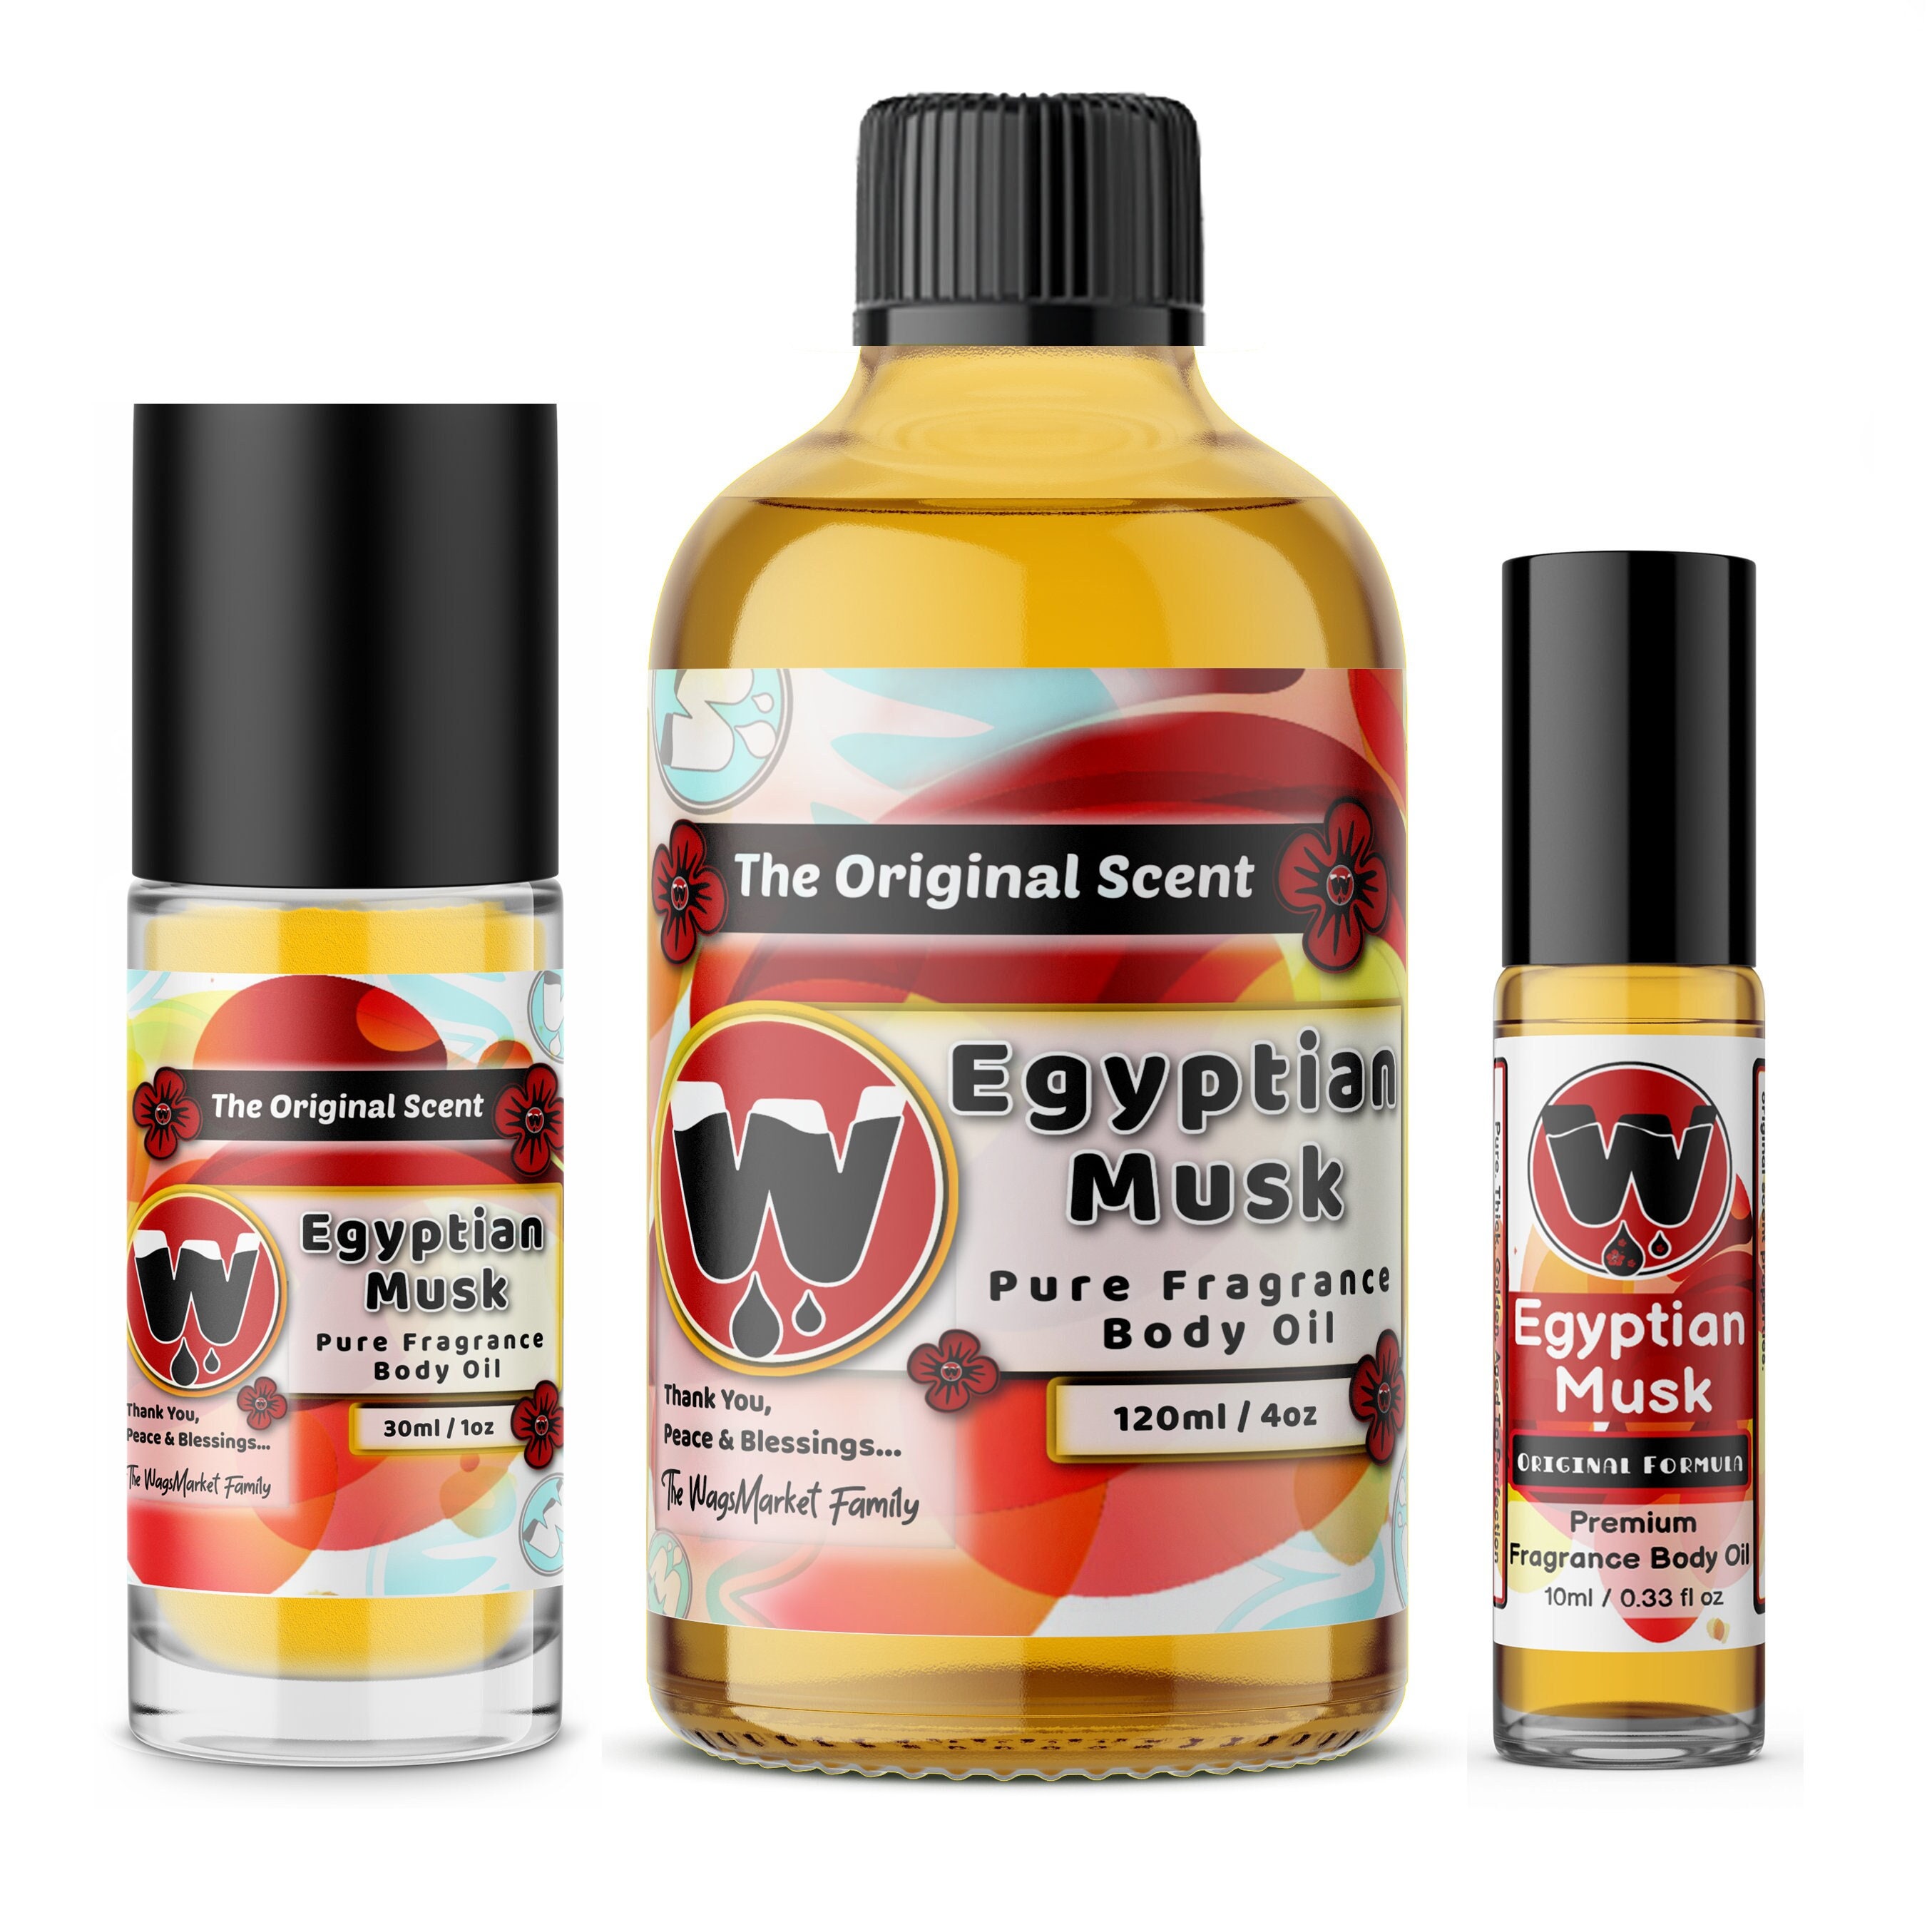 EGYPTIAN MUSK SUPERIOR Perfume Oil by Sukran 15ml Lasts All Day